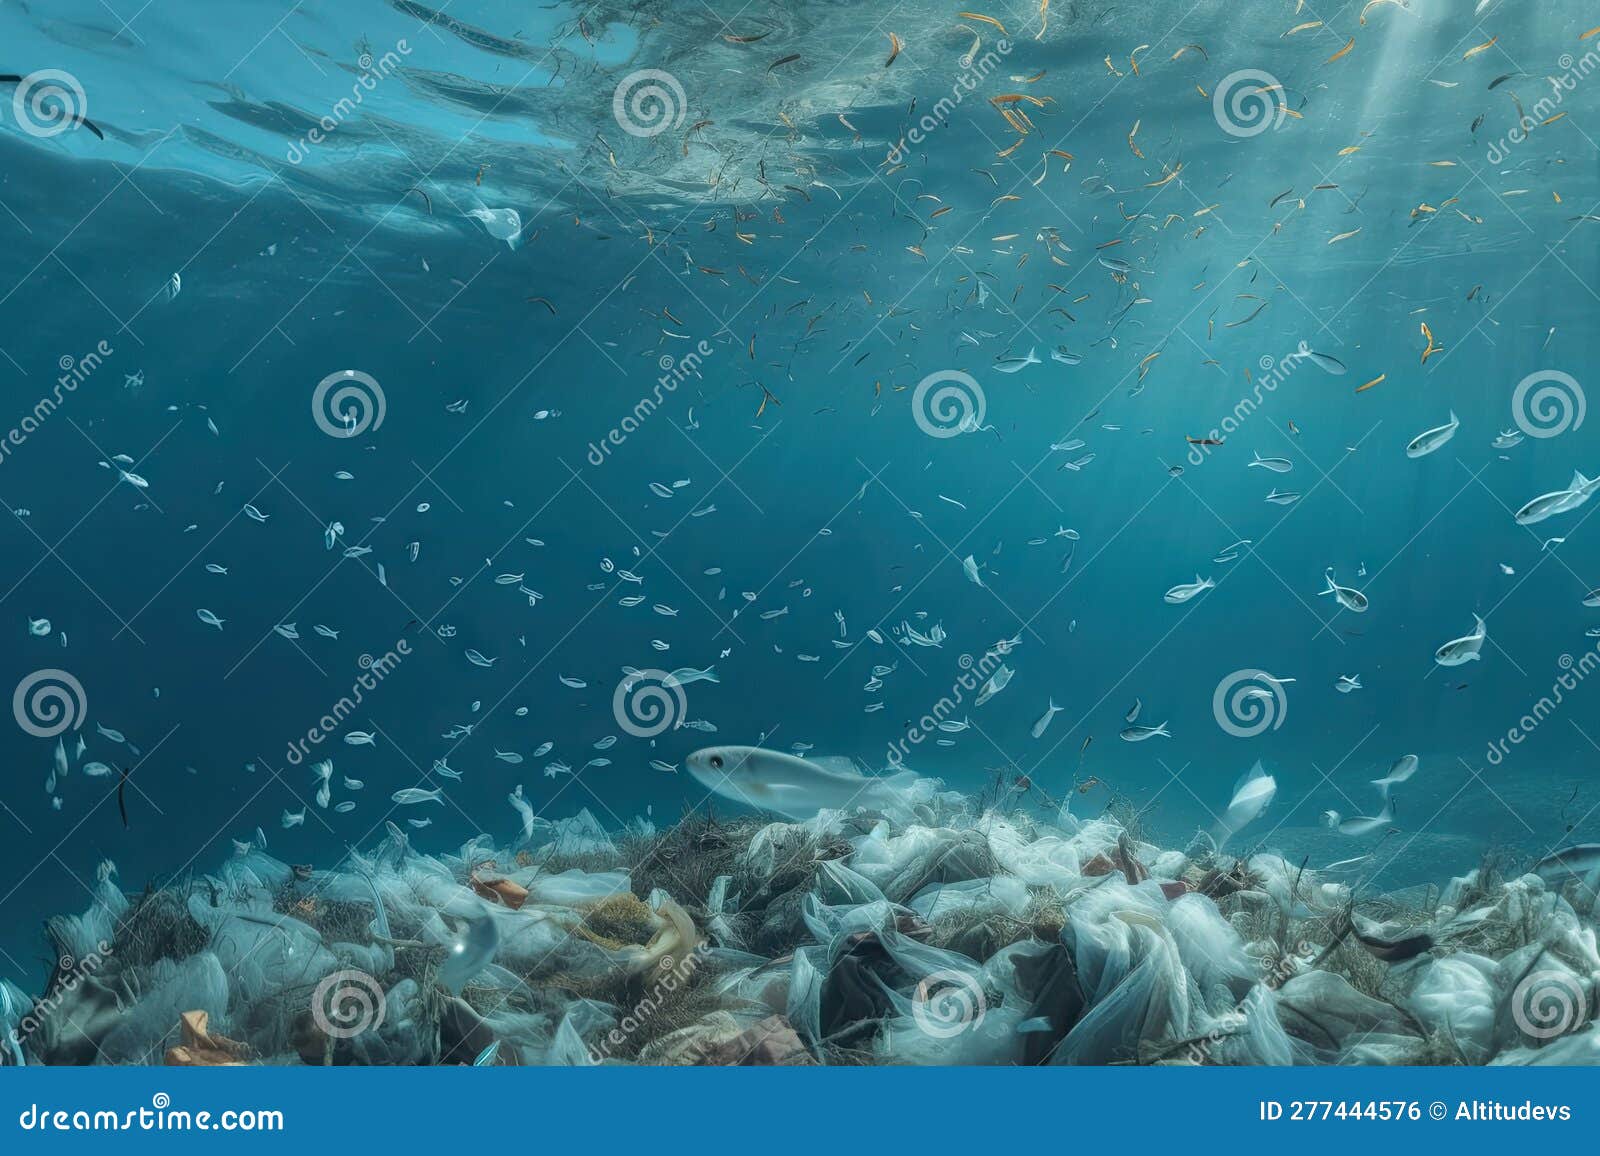 Microplastic Pollution in the Ocean, with Fish and Plankton Swimming ...